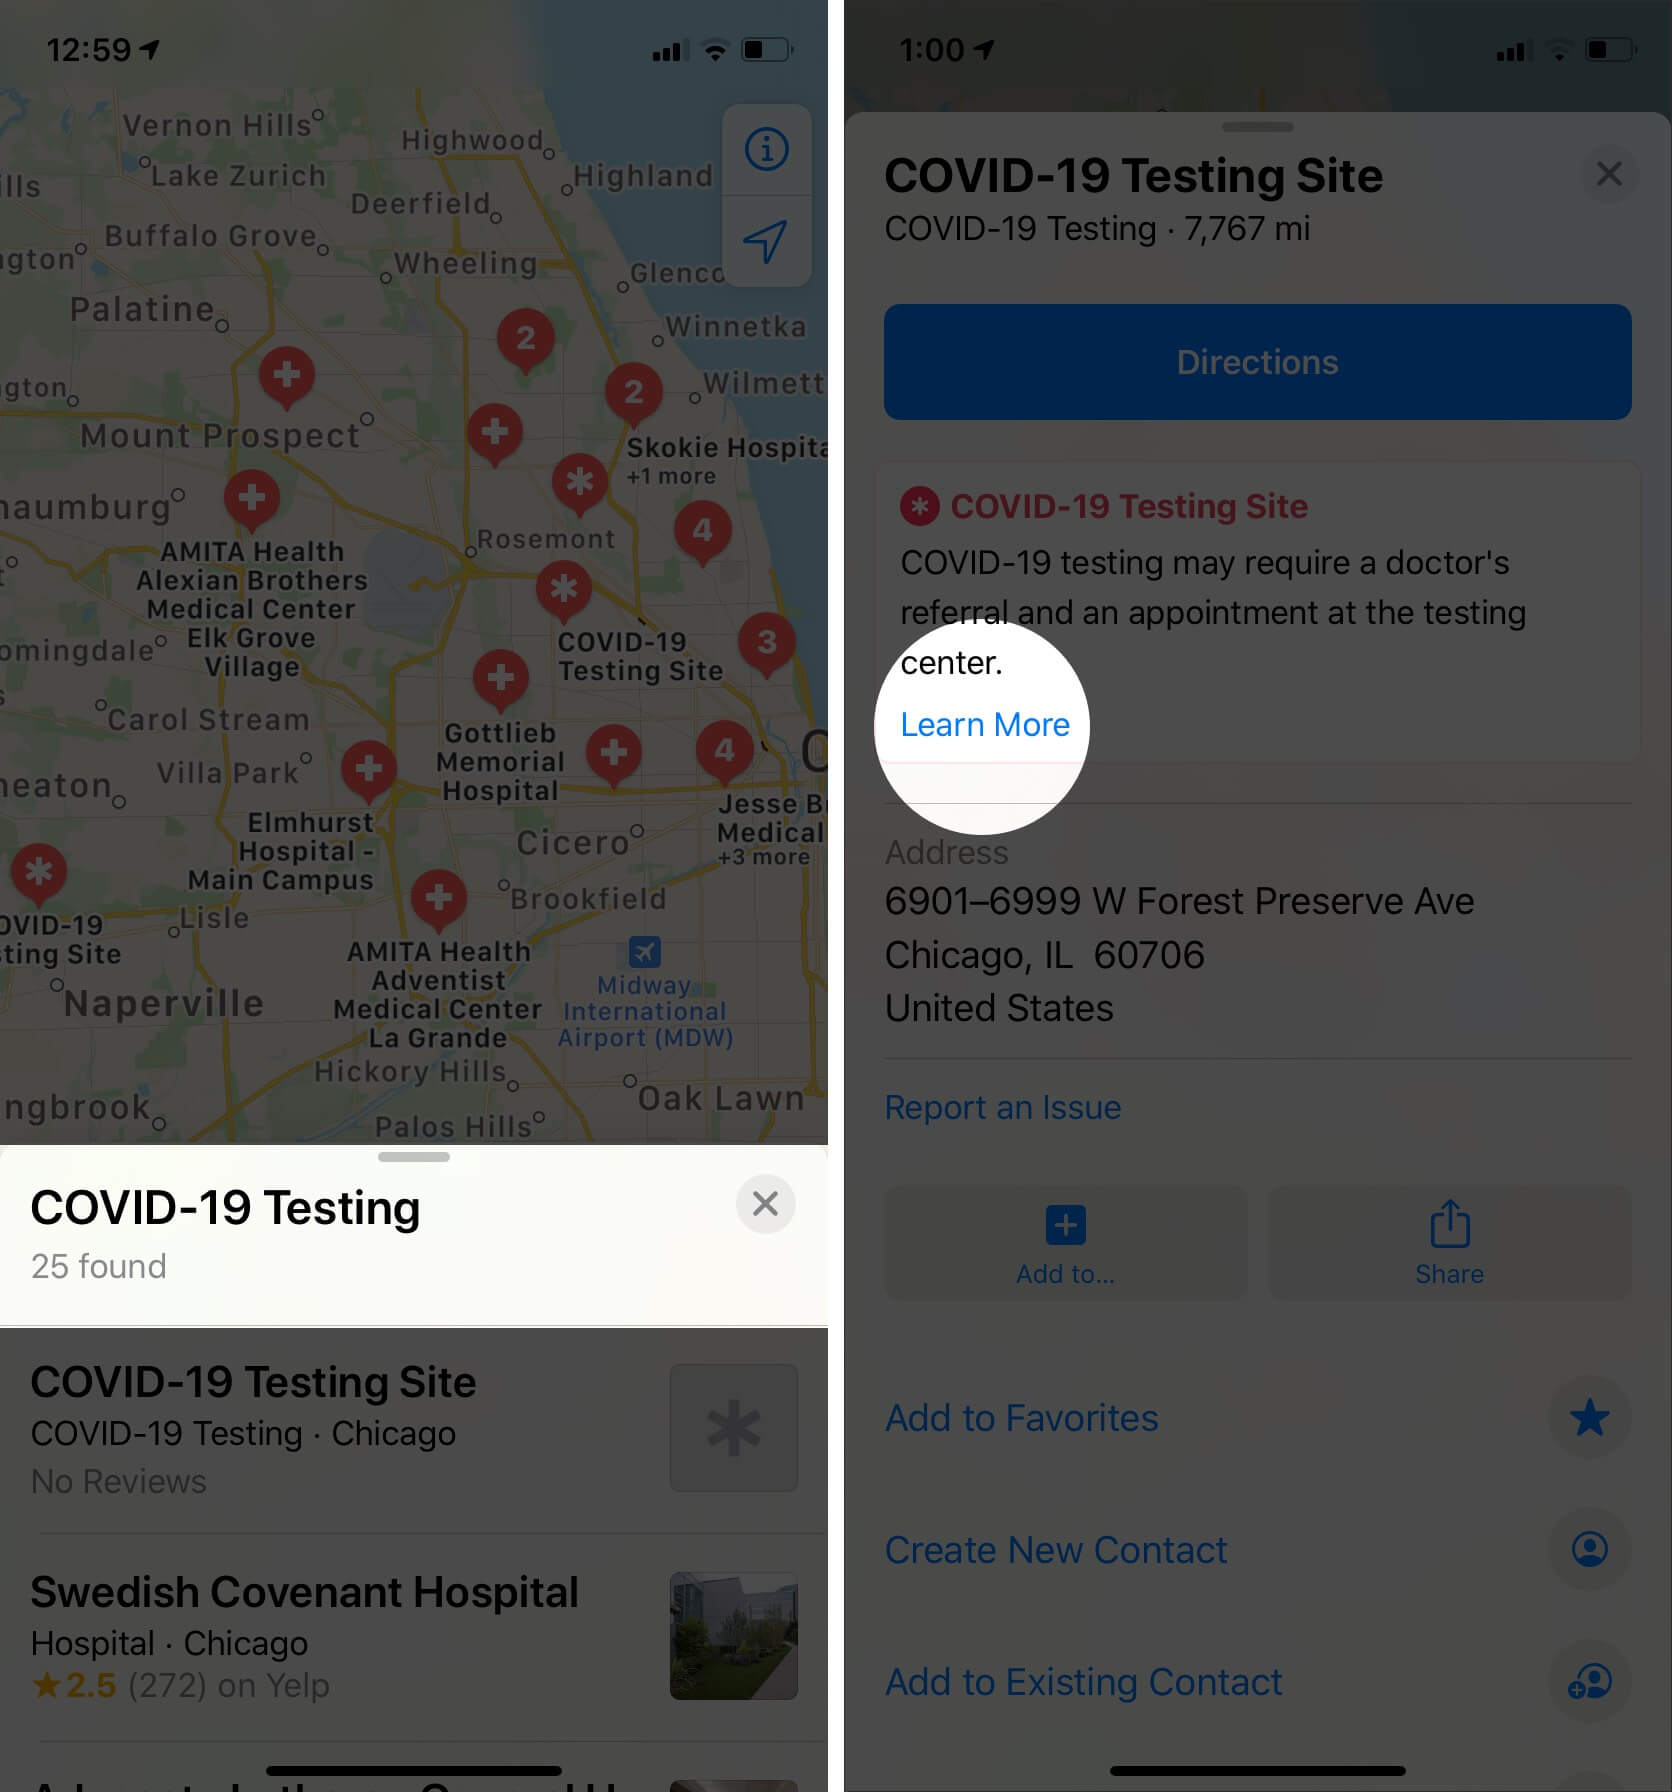 Find COVID-19 Testing Locations in Apple Maps